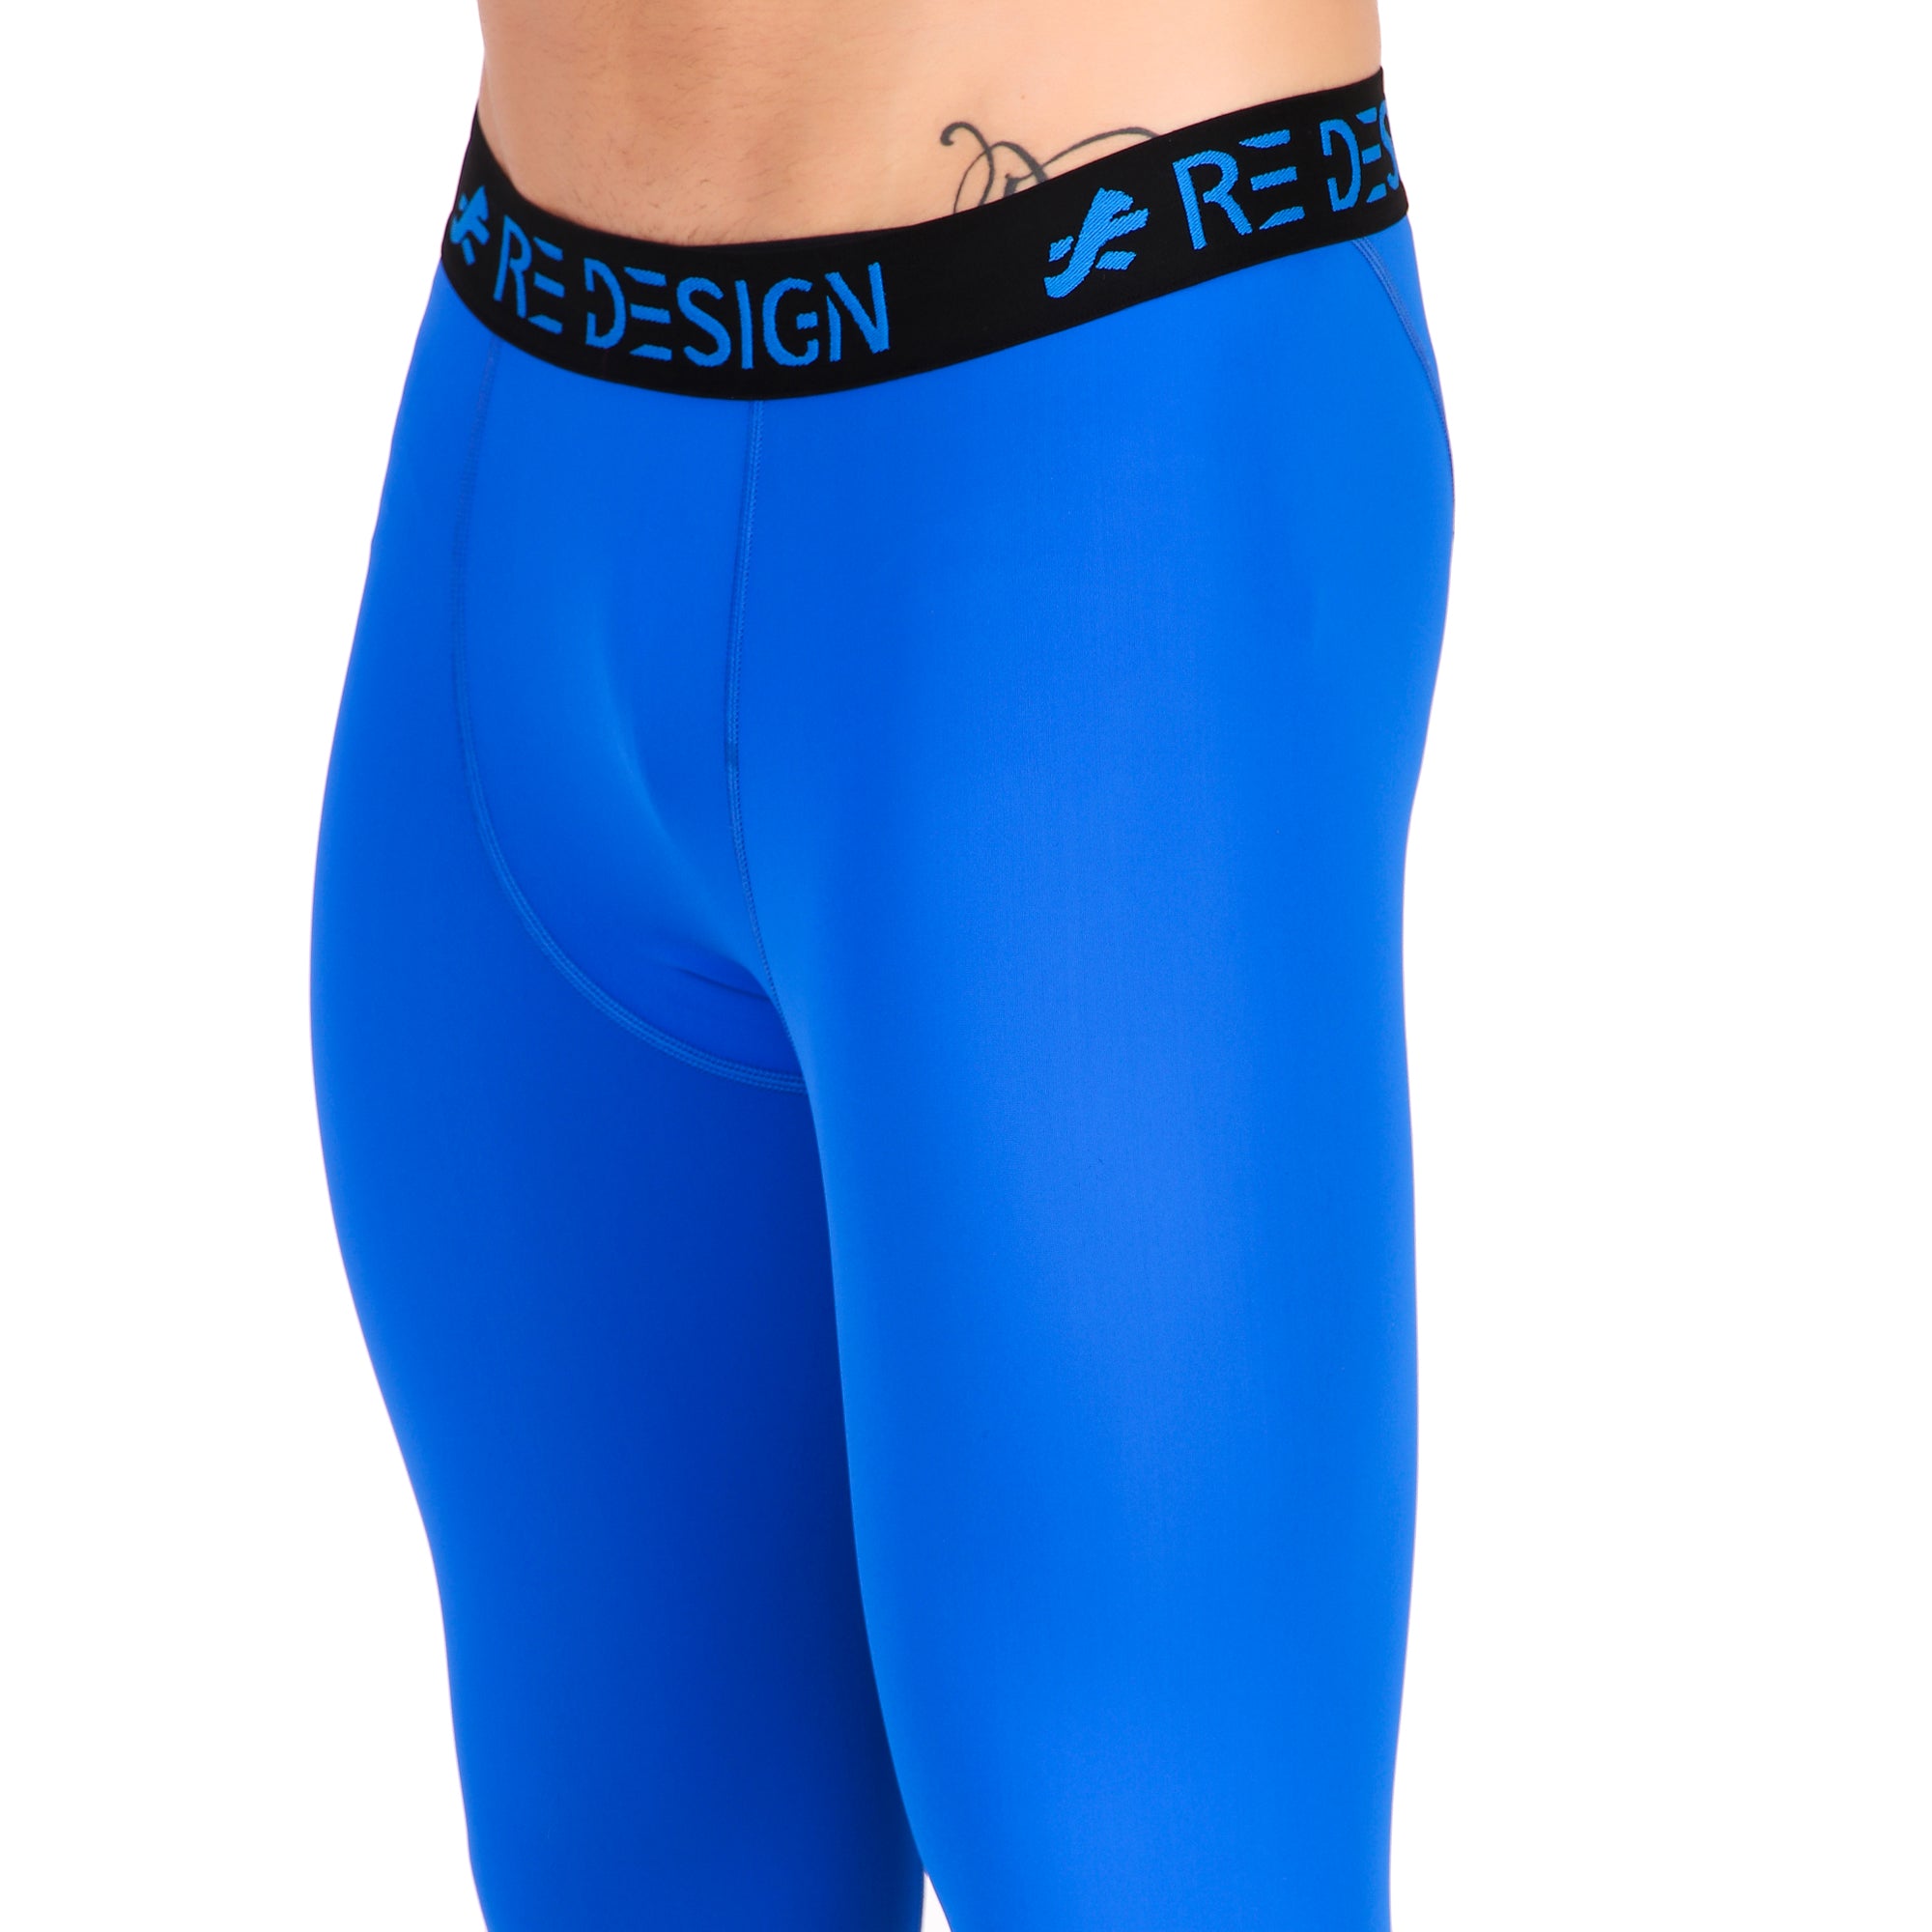 Nylon Compression Pant and Full Tights For Men (Royal Blue